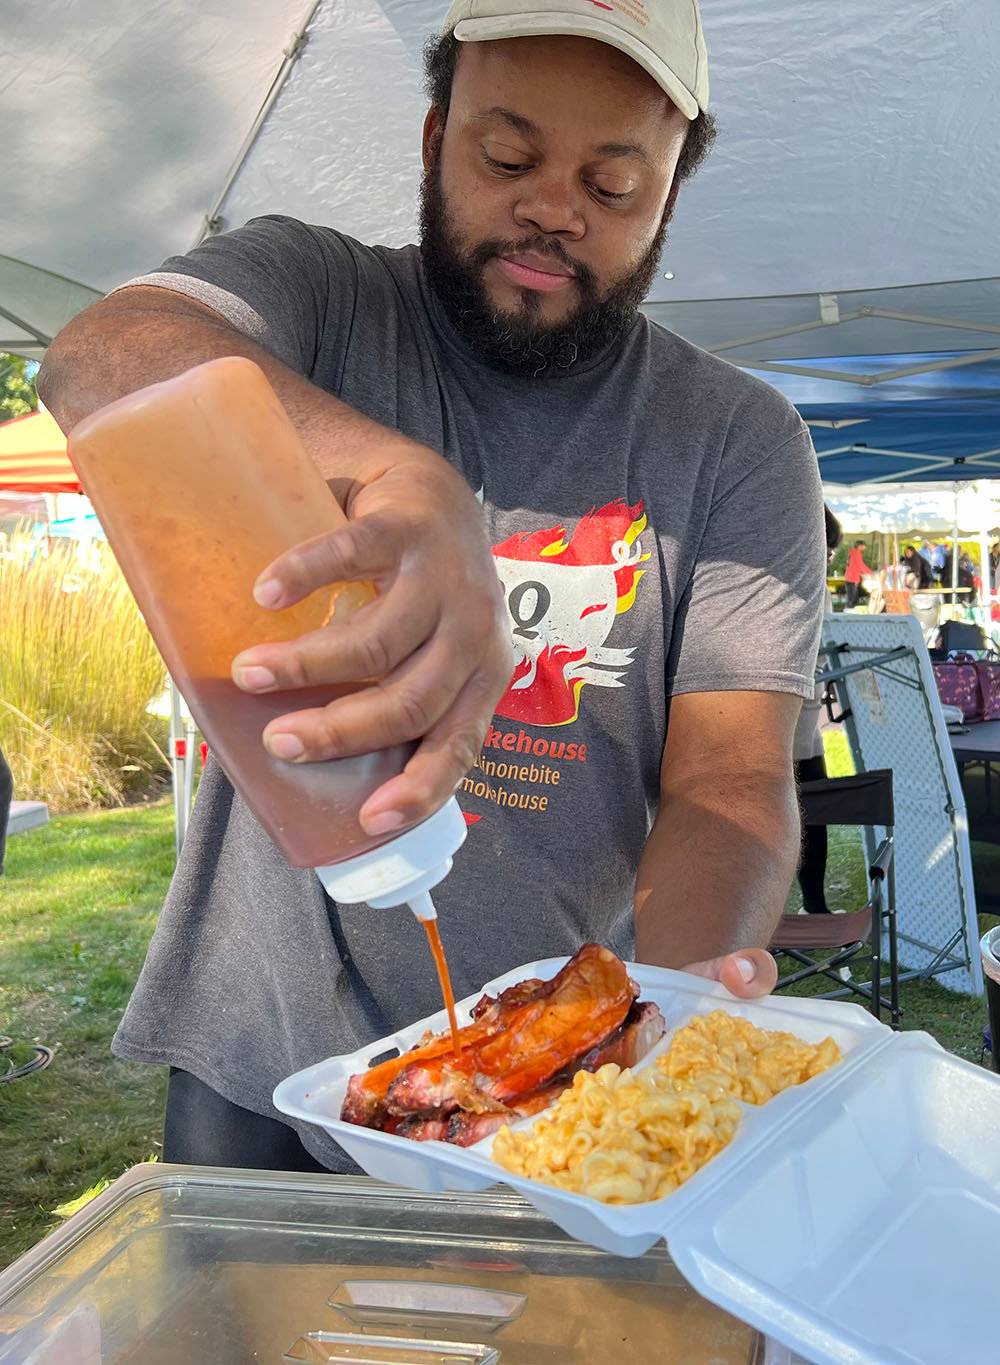 Marlon Moore, co-owner of LaVelle’s Smokehouse, adds a little extra sauce to some prepared ribs along with a side of macaroni and cheese.